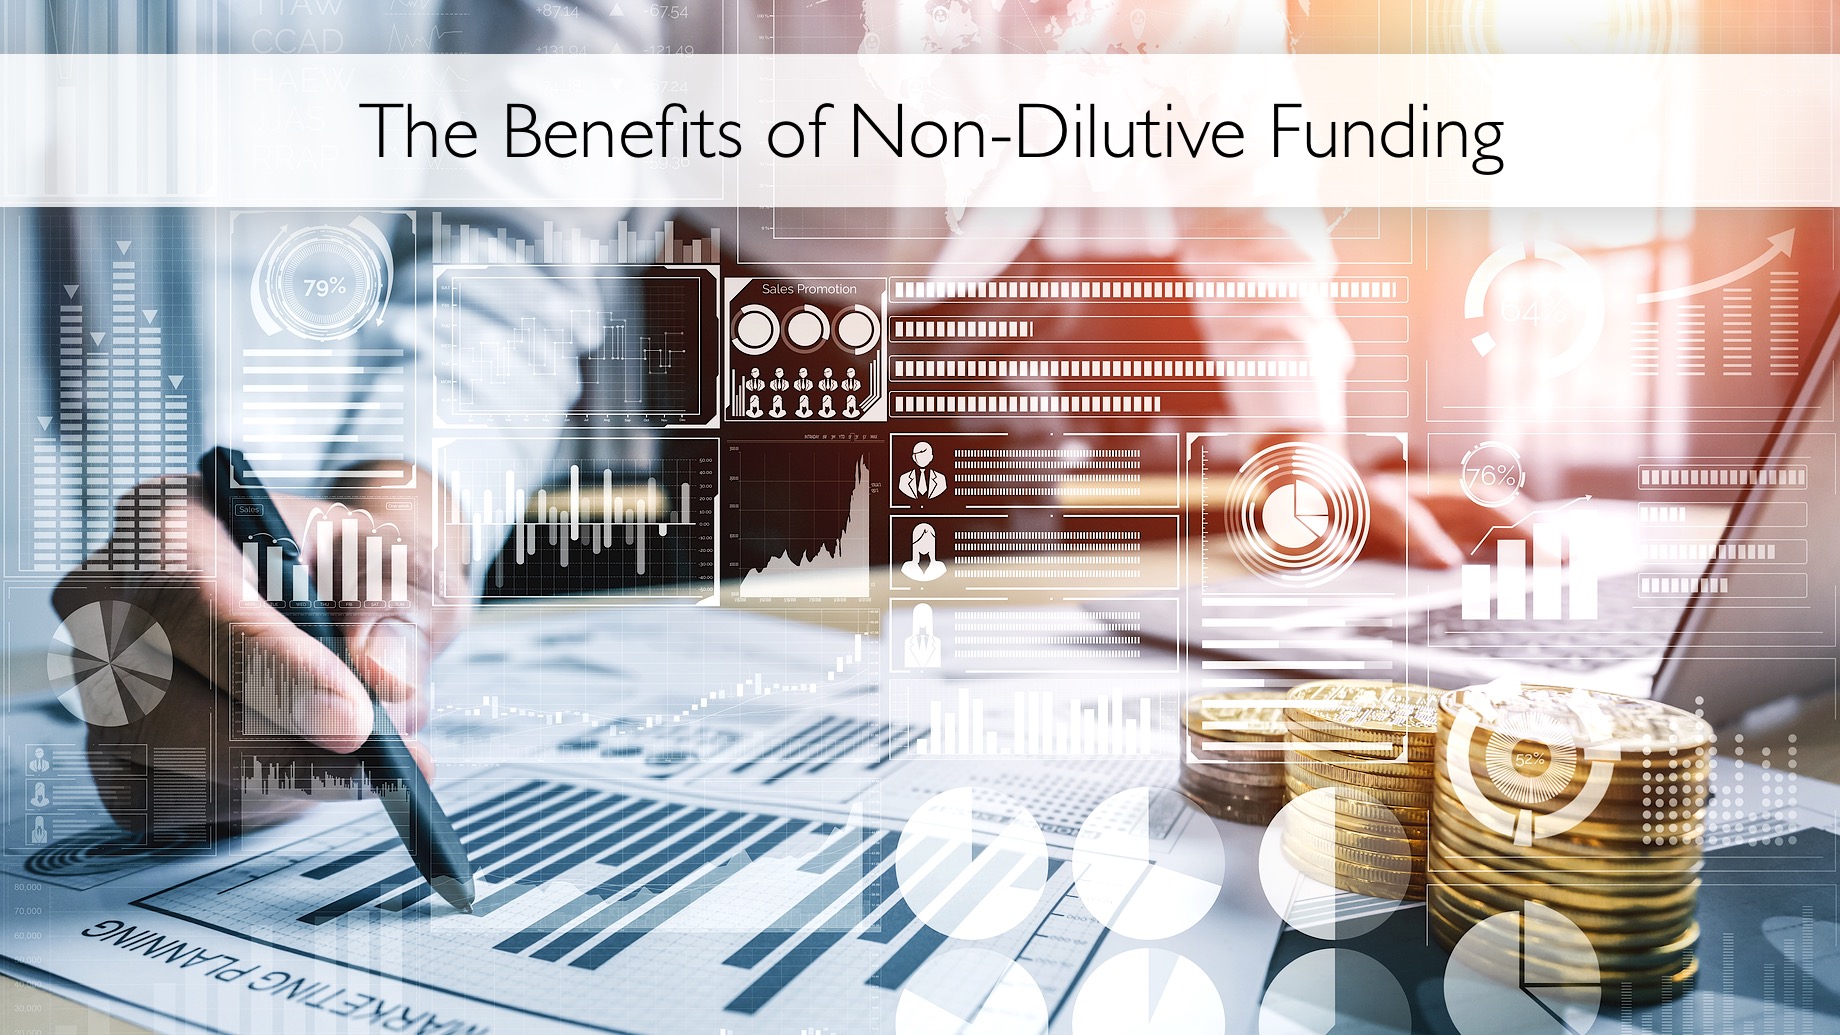 The Benefits of Non-Dilutive Funding